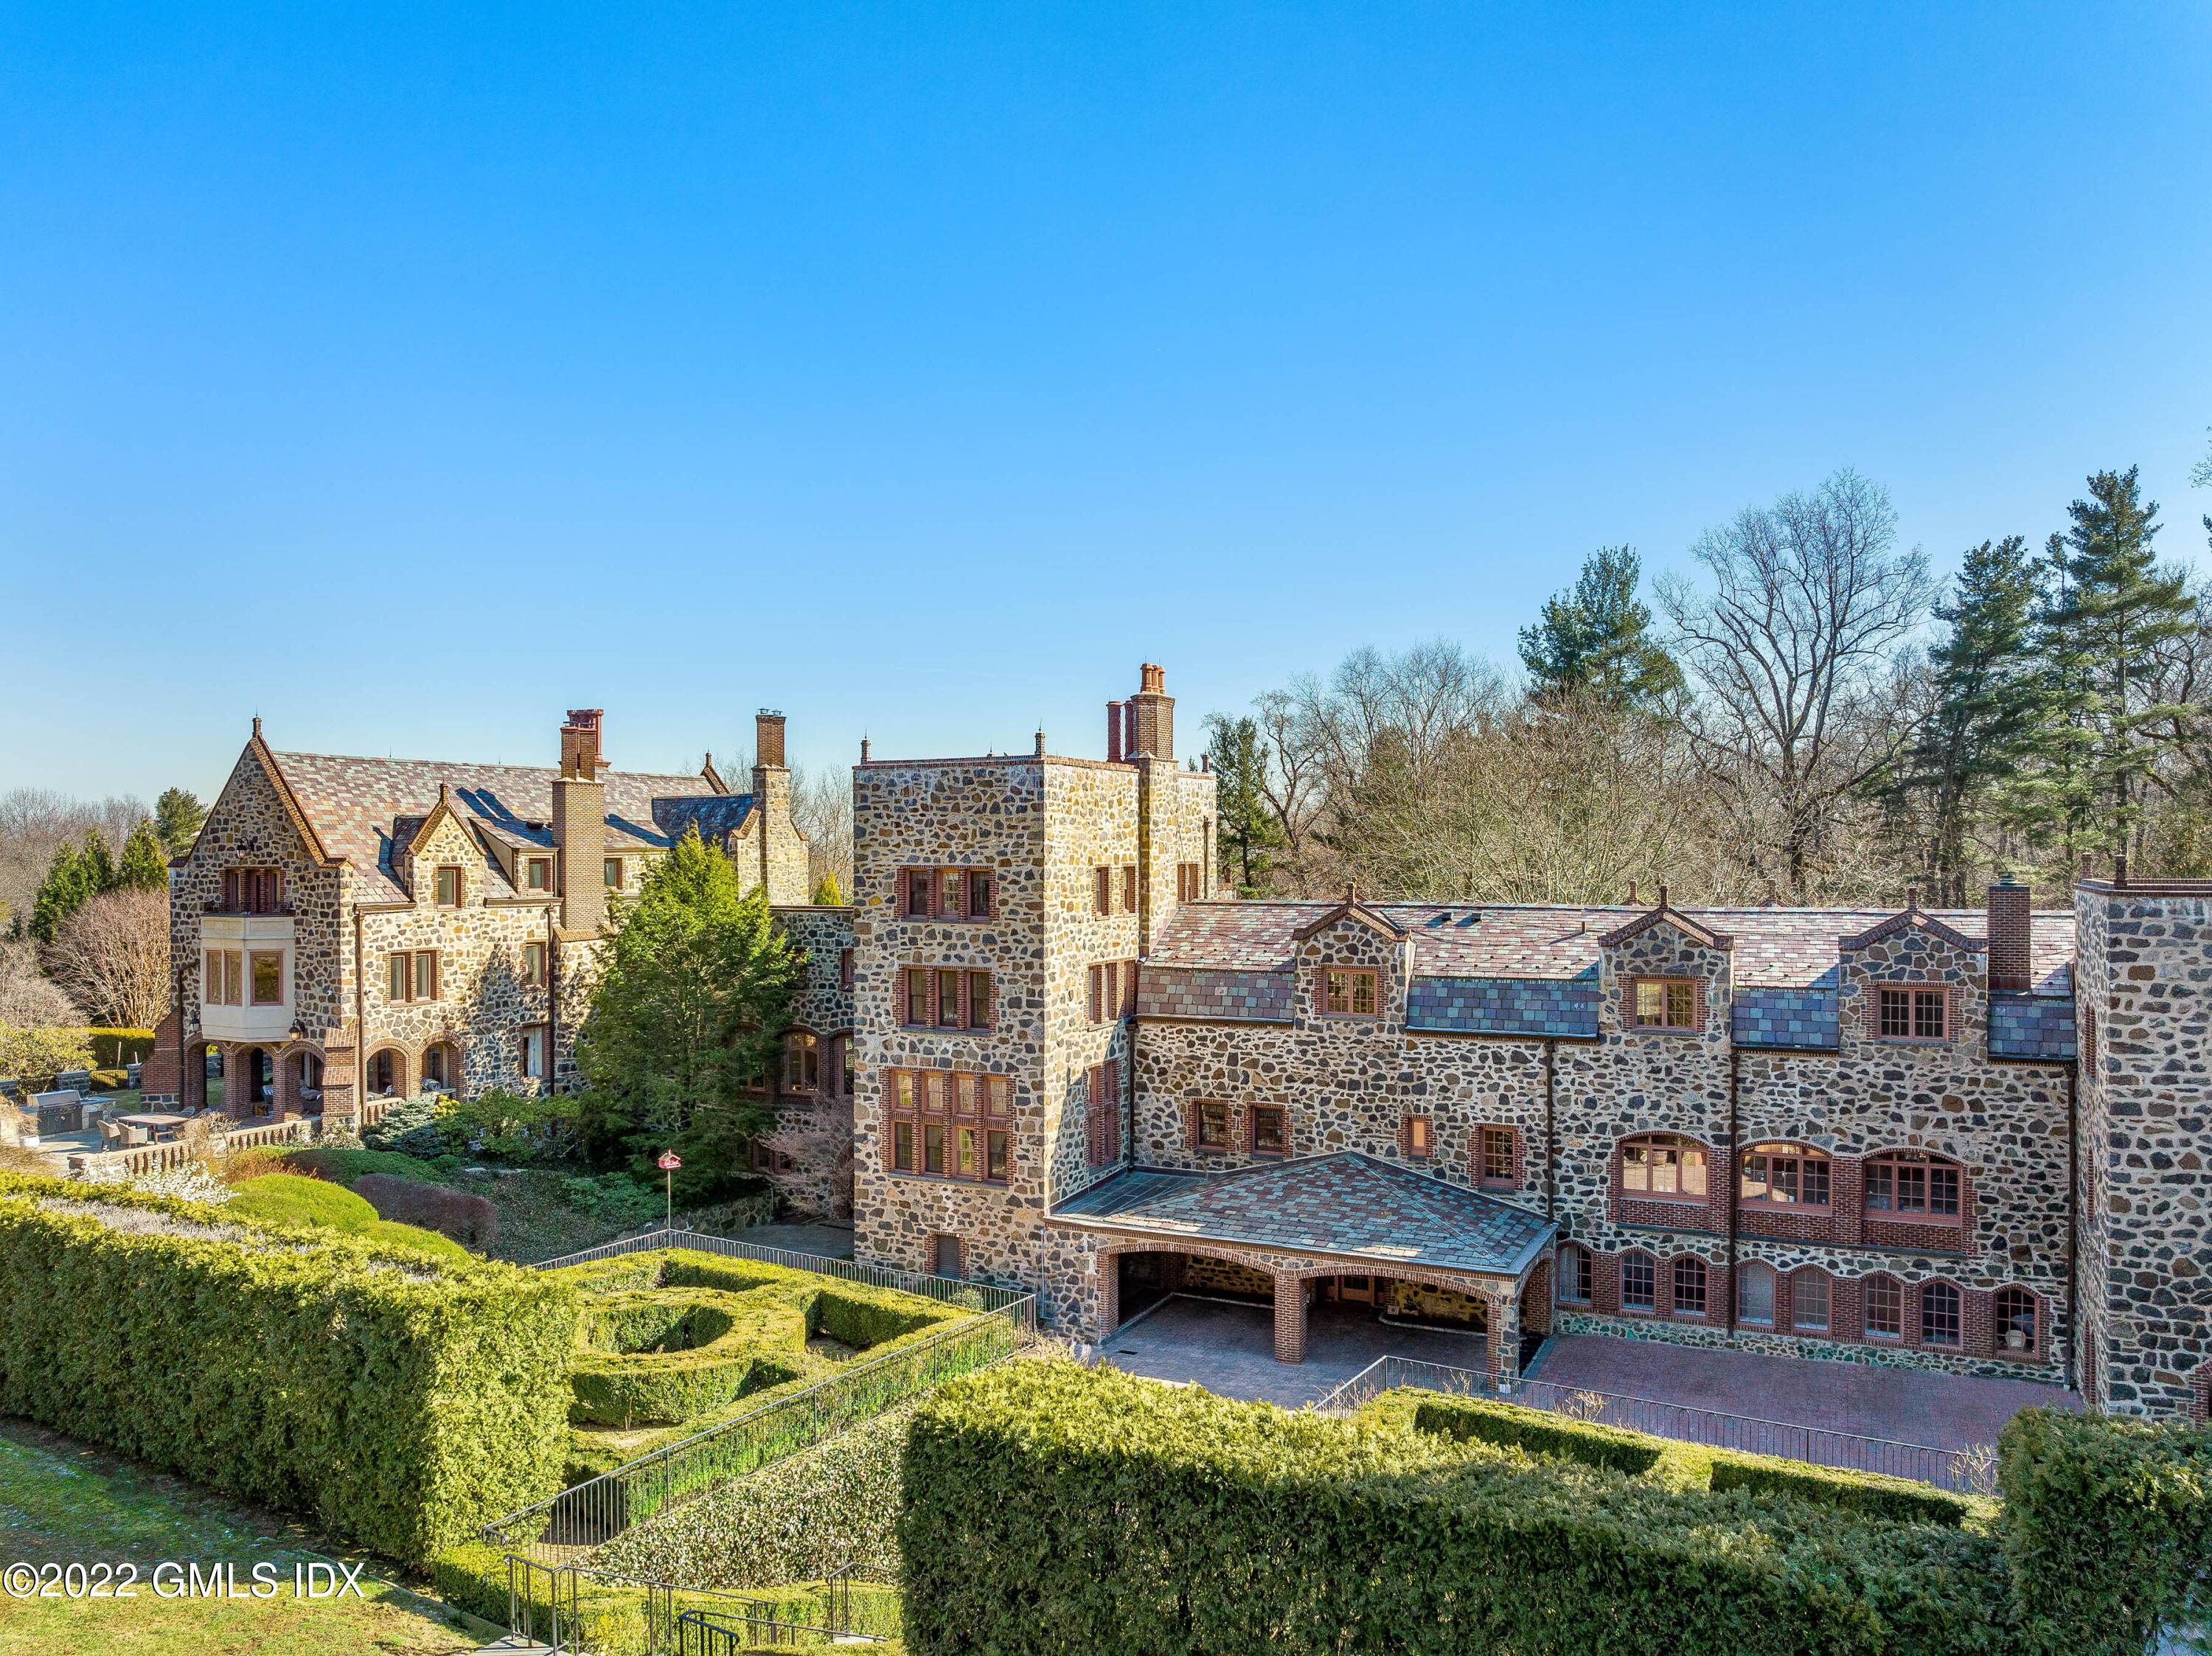 Hemlock Castle offers a rare opportunity to acquire a home that is truly regal.